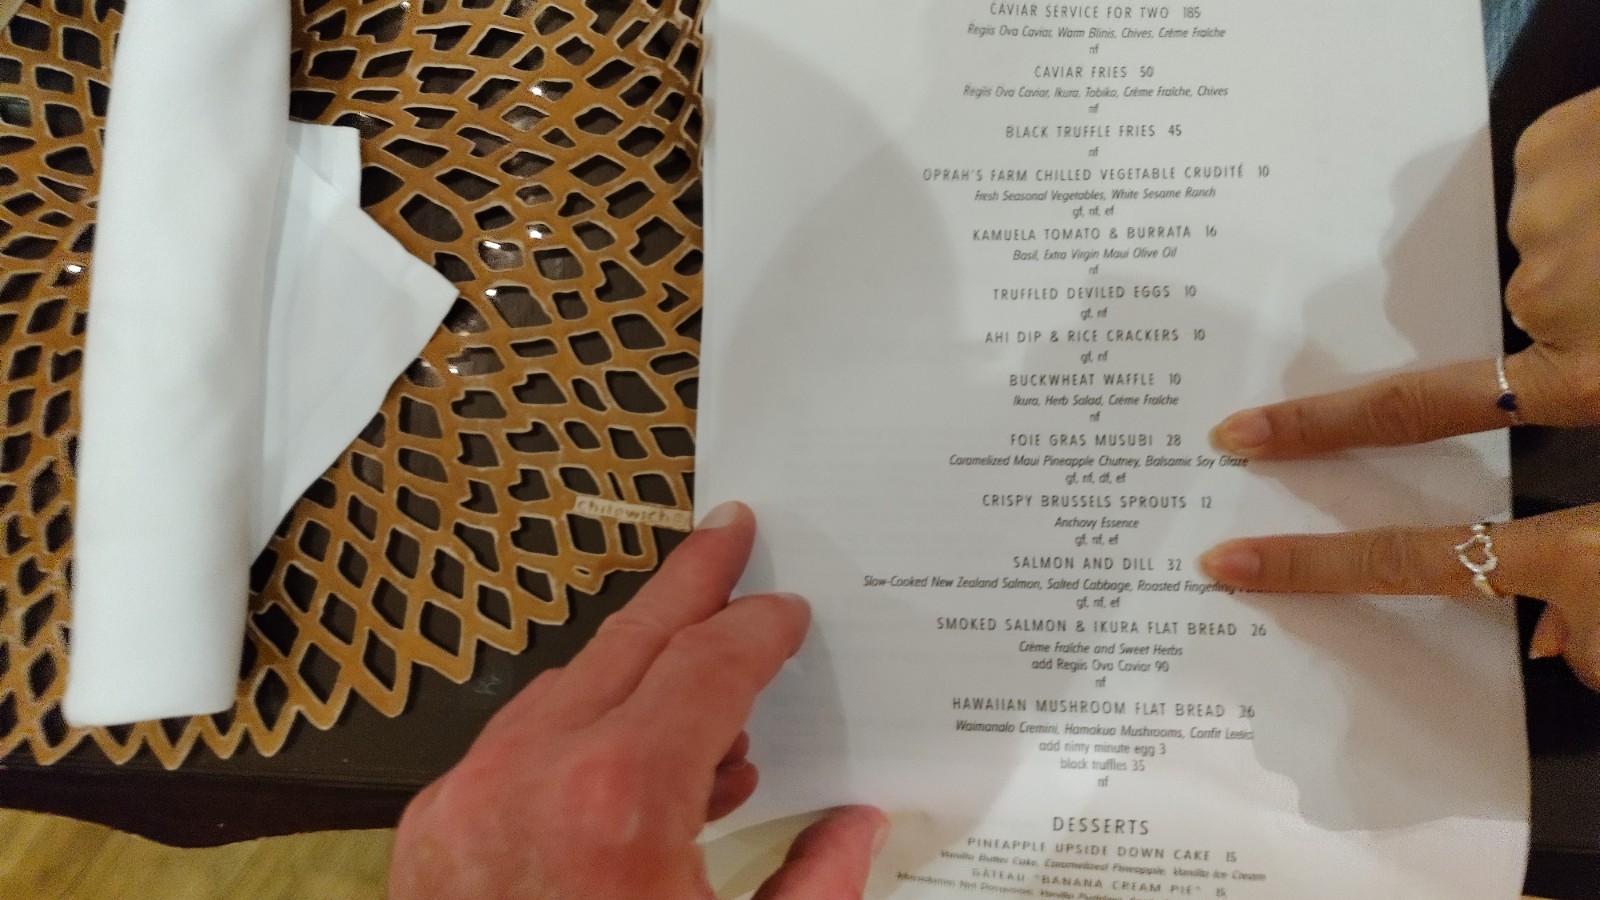 PICTURE OF DINNER MENU